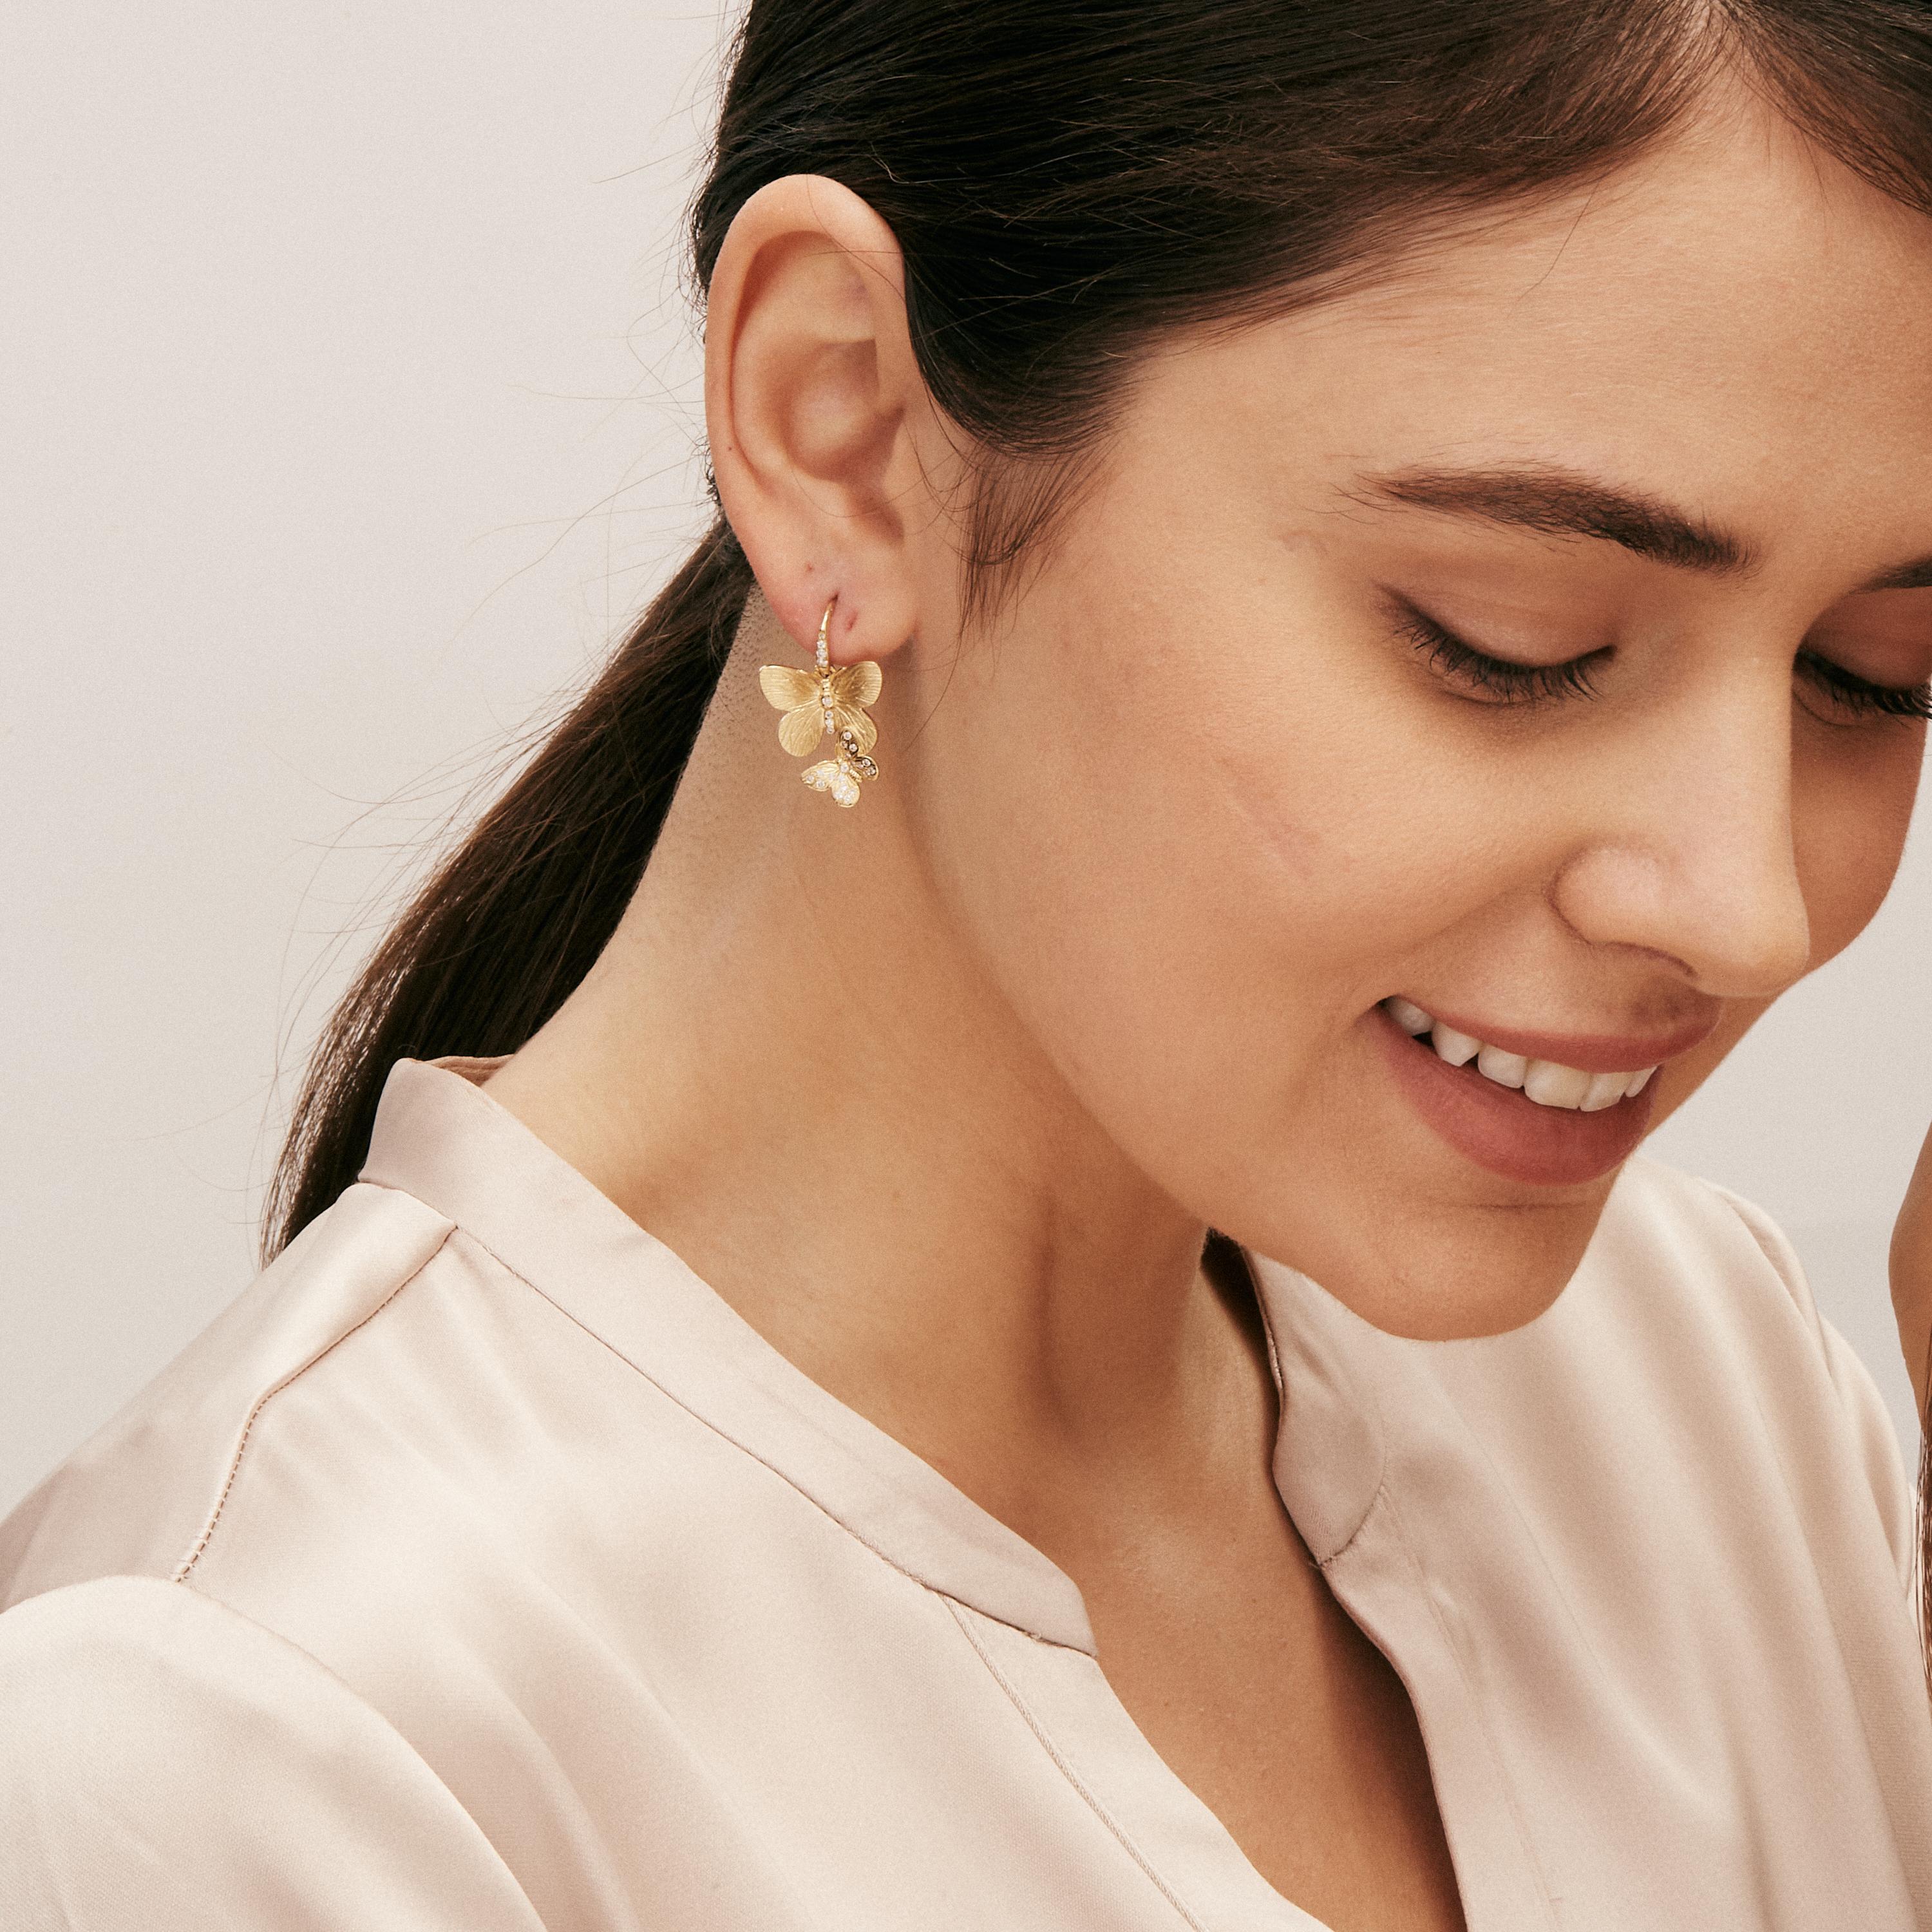 Created in 18 karat yellow gold
Diamonds 0.30 carat approx.
French wire for pierced ears
Limited edition

Exquisitely crafted in 18 karat yellow gold, these limited-edition earrings flaunt diamonds of approximately 0.30 carats, secured on French